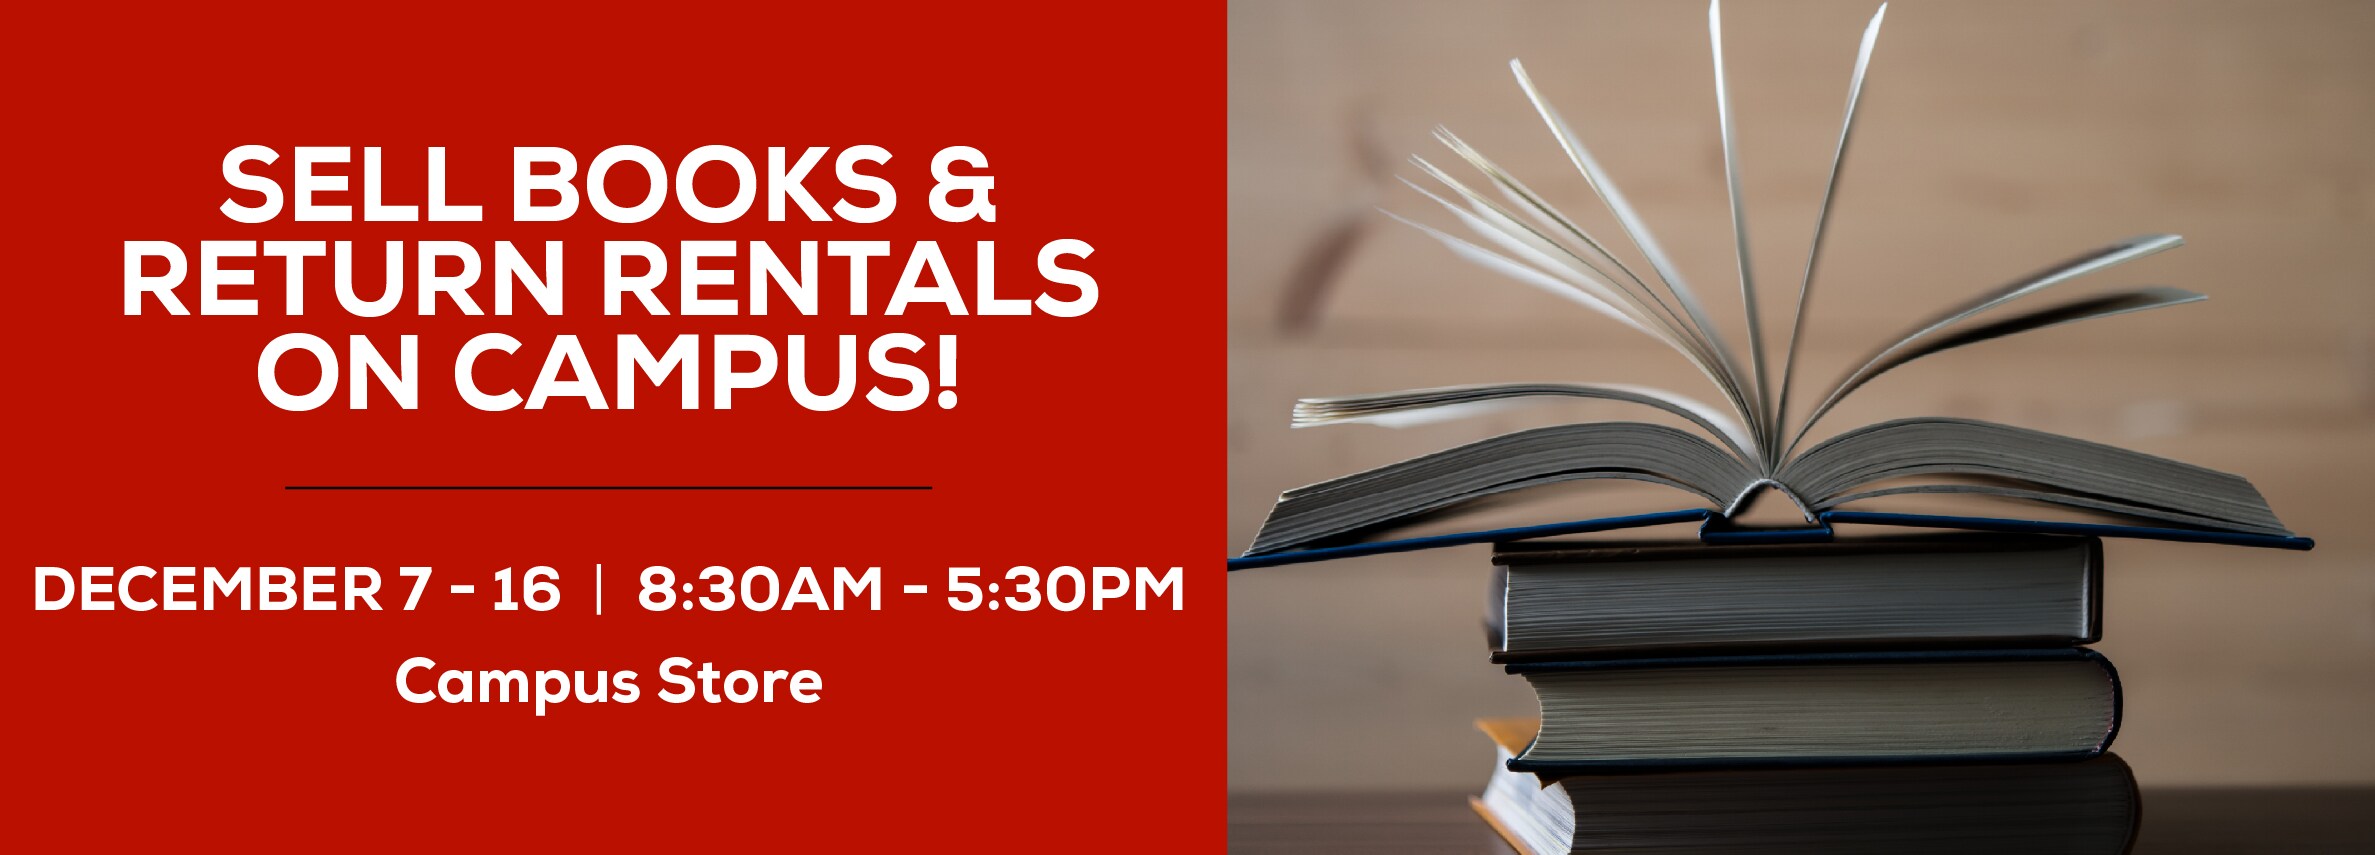 Sell books and return rentals on campus! December 7 - 16. 8:30am to 5:30pm at the Campus Store.